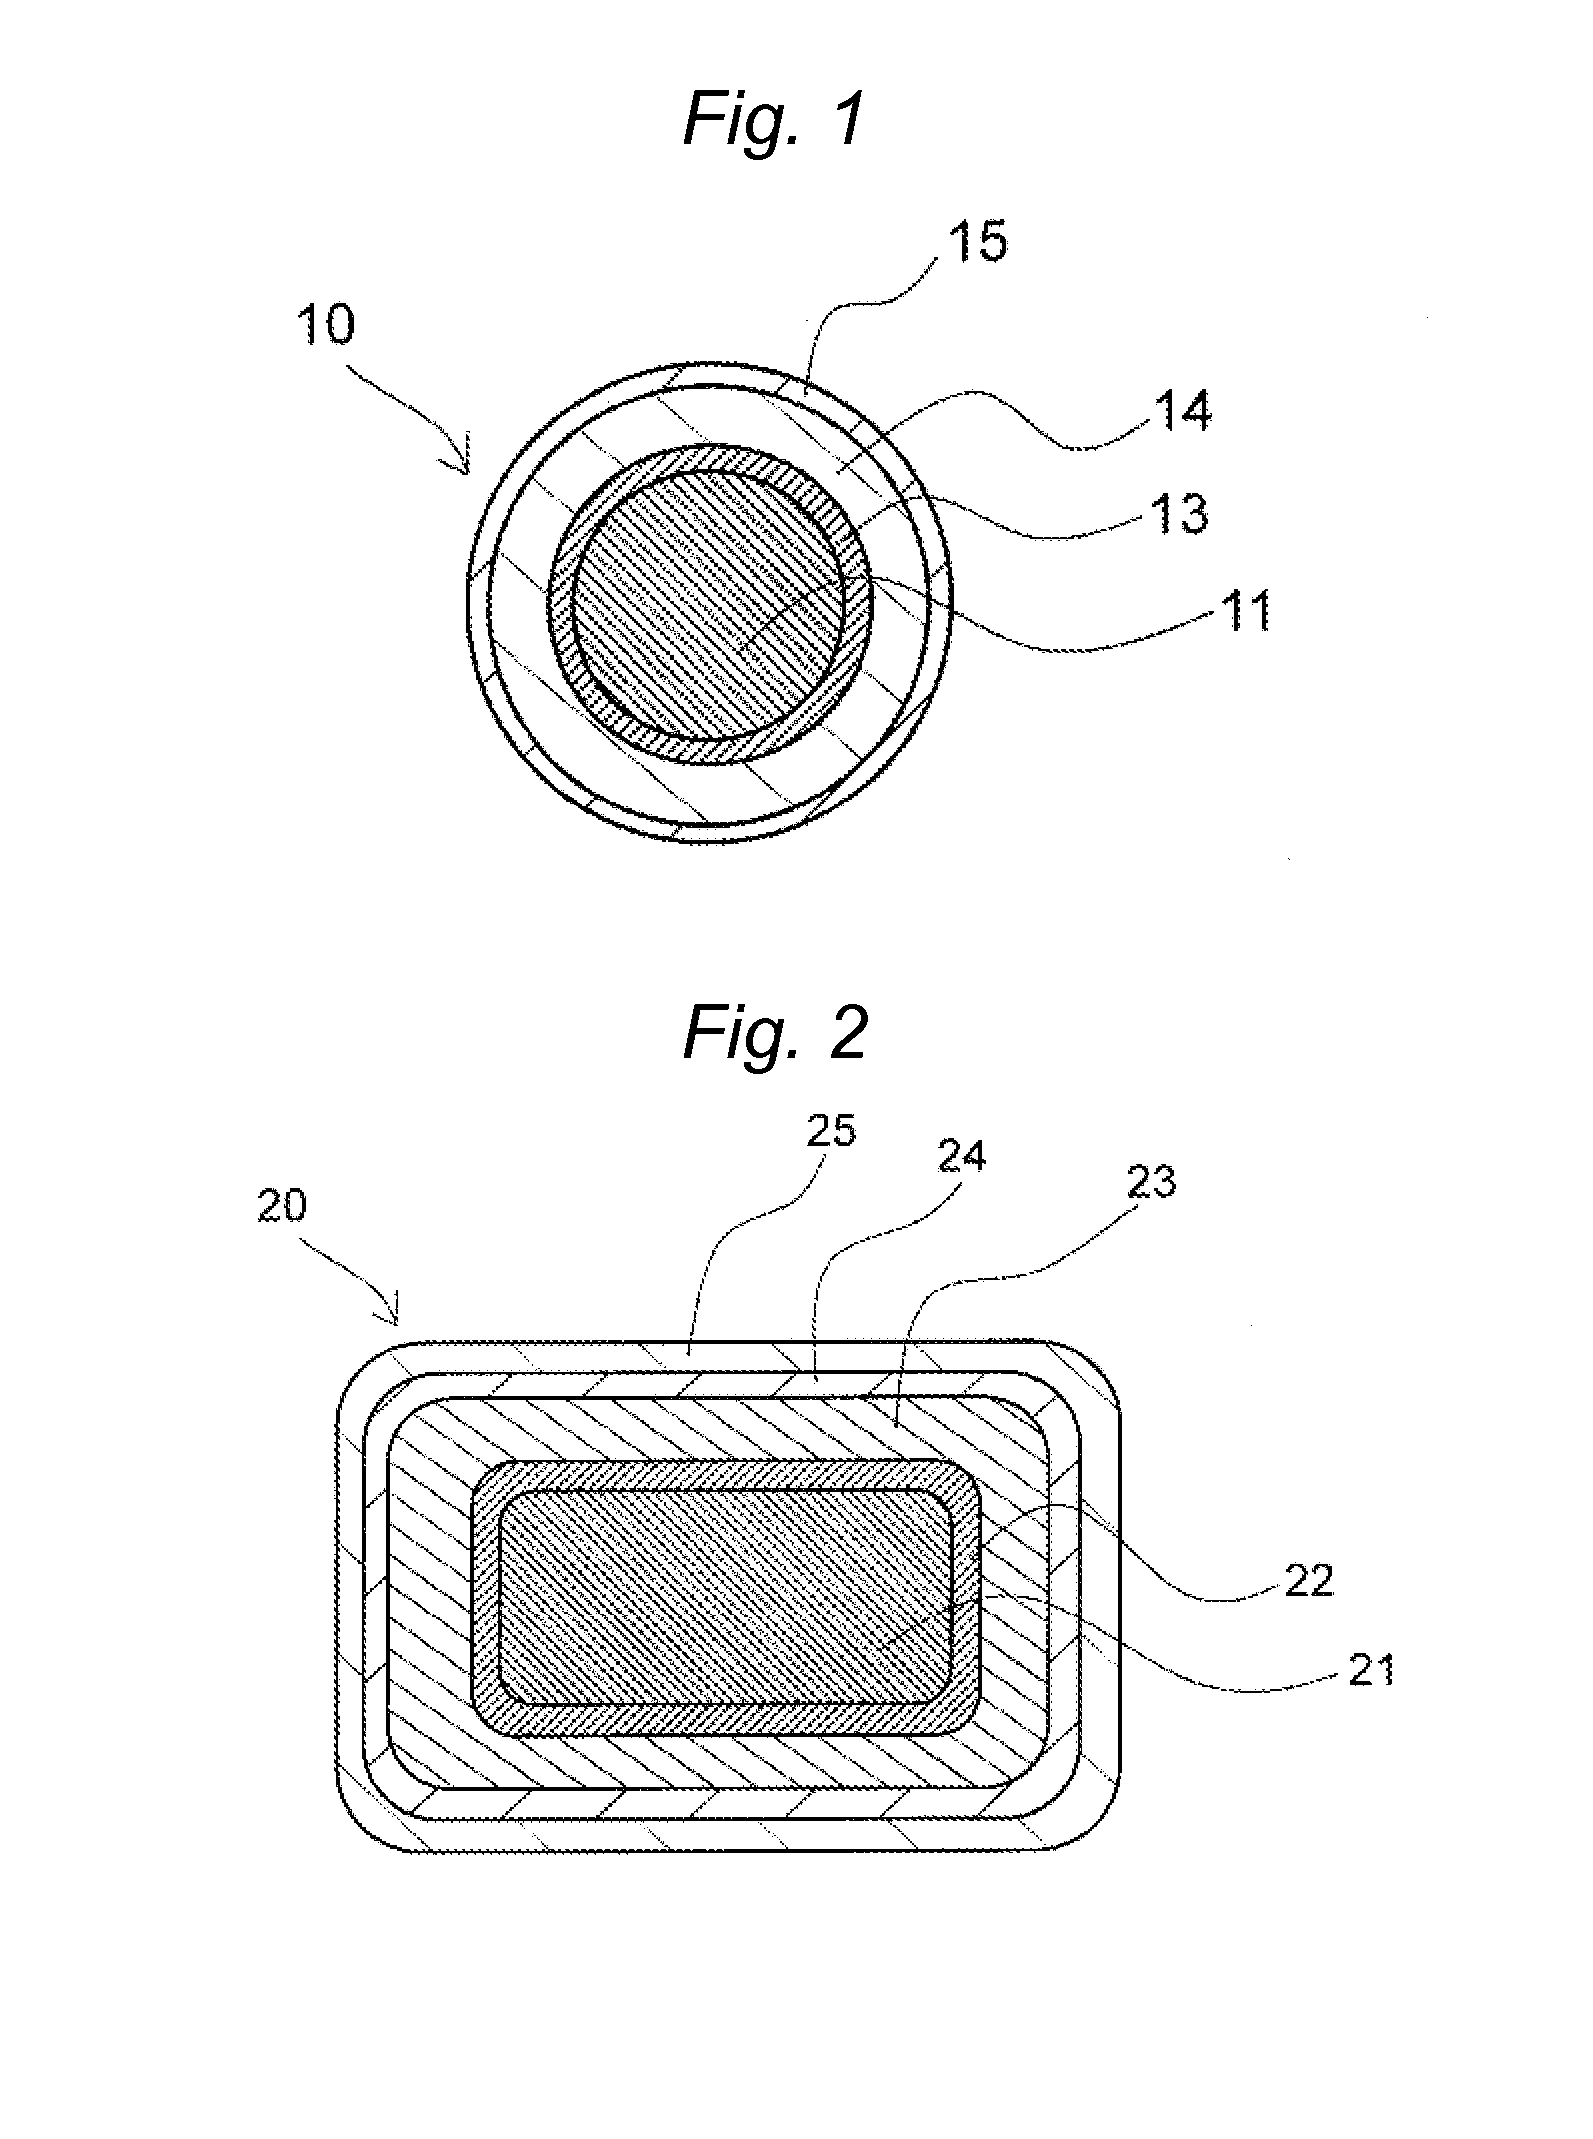 Insulated wire having a layer containing bubbles, electrical equipment, and method of producing insulated wire having a layer containing bubbles